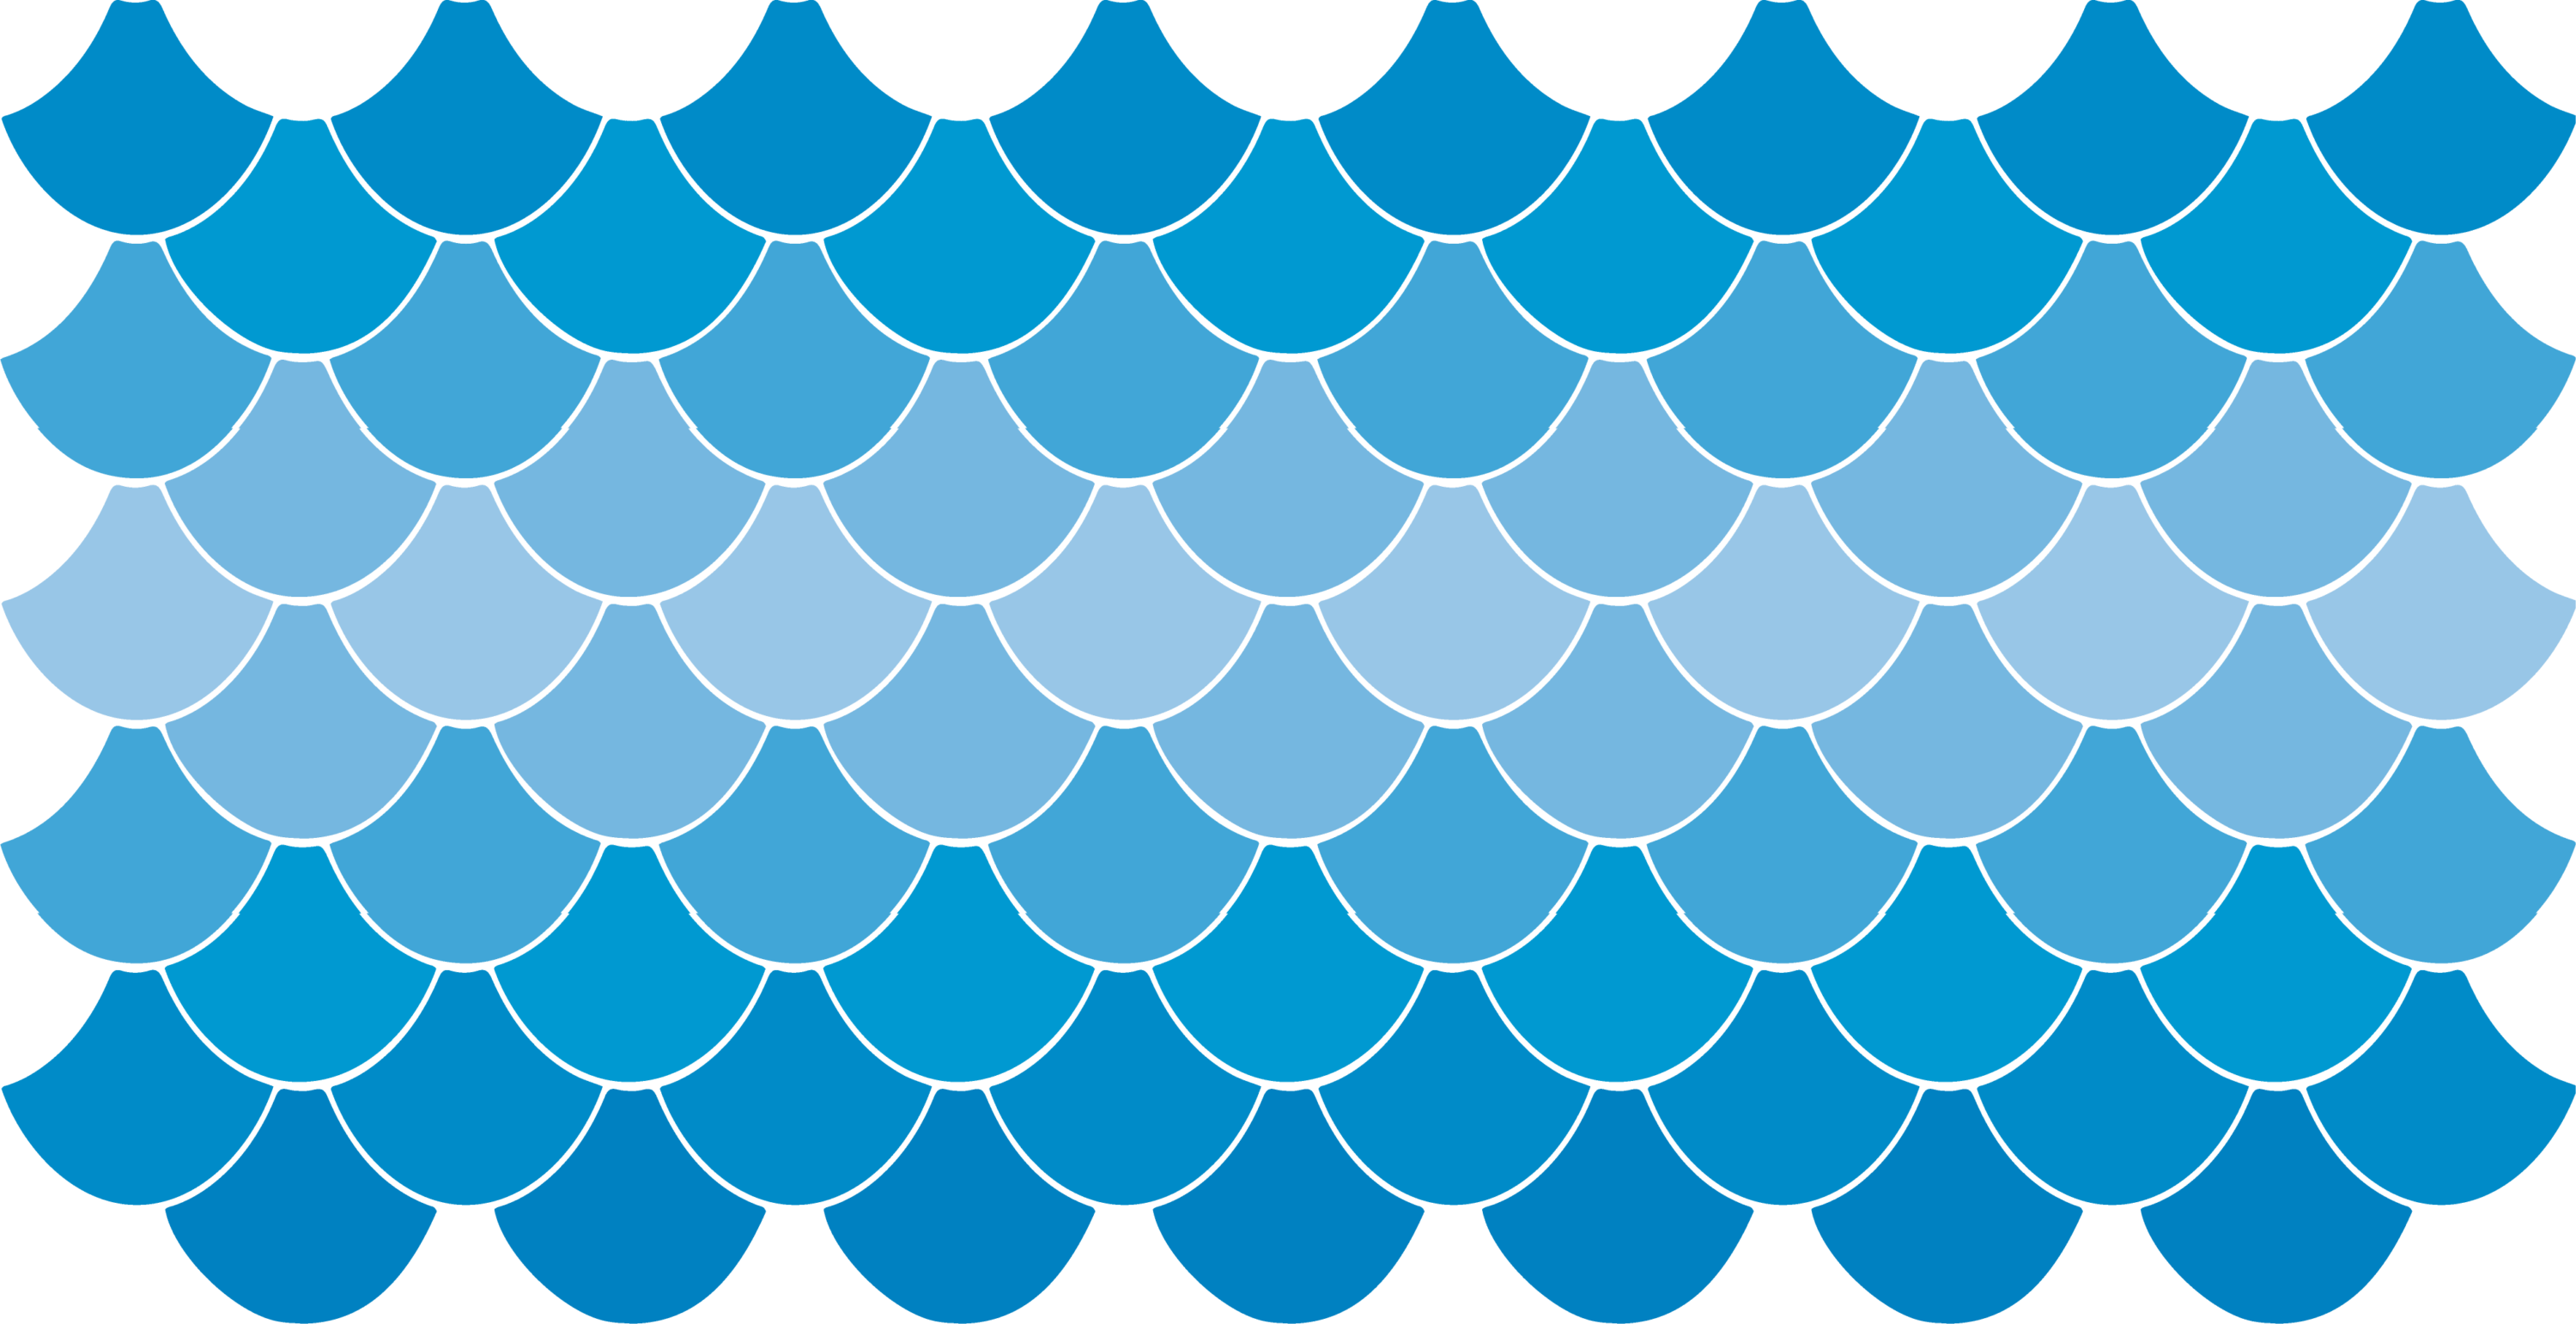 Different shades of blue scales.